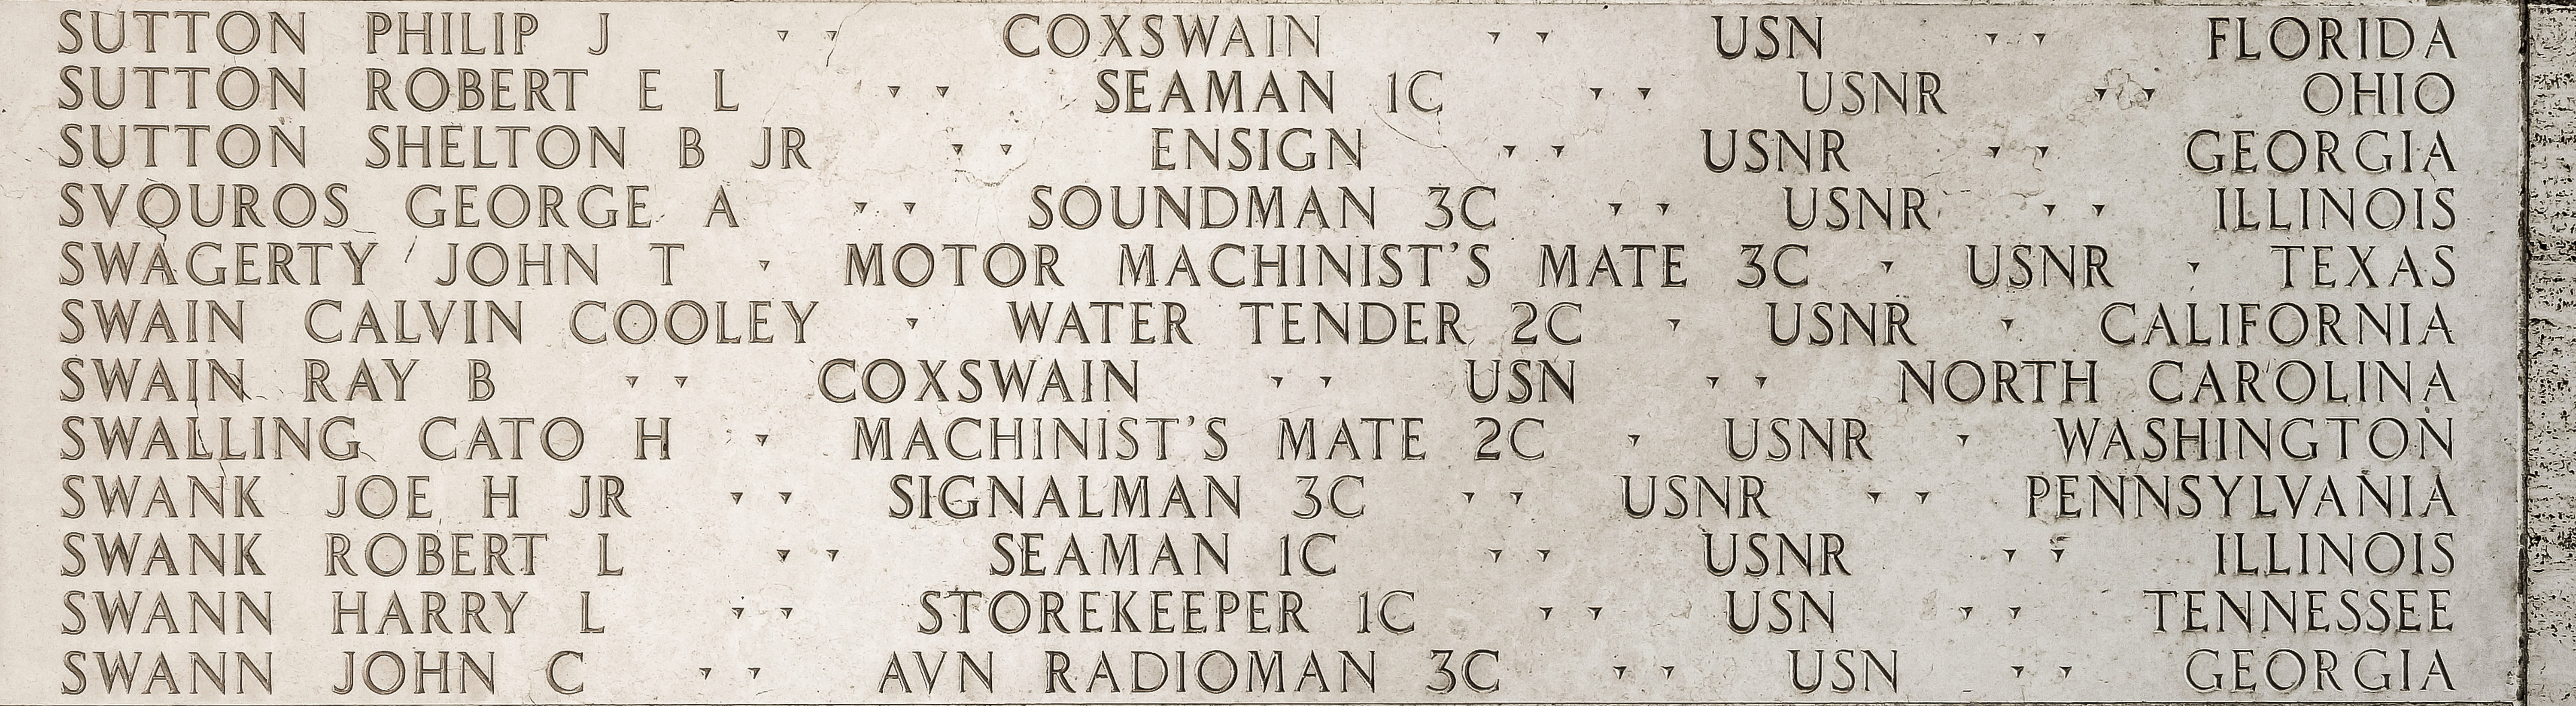 Calvin Cooley Swain, Water Tender Second Class